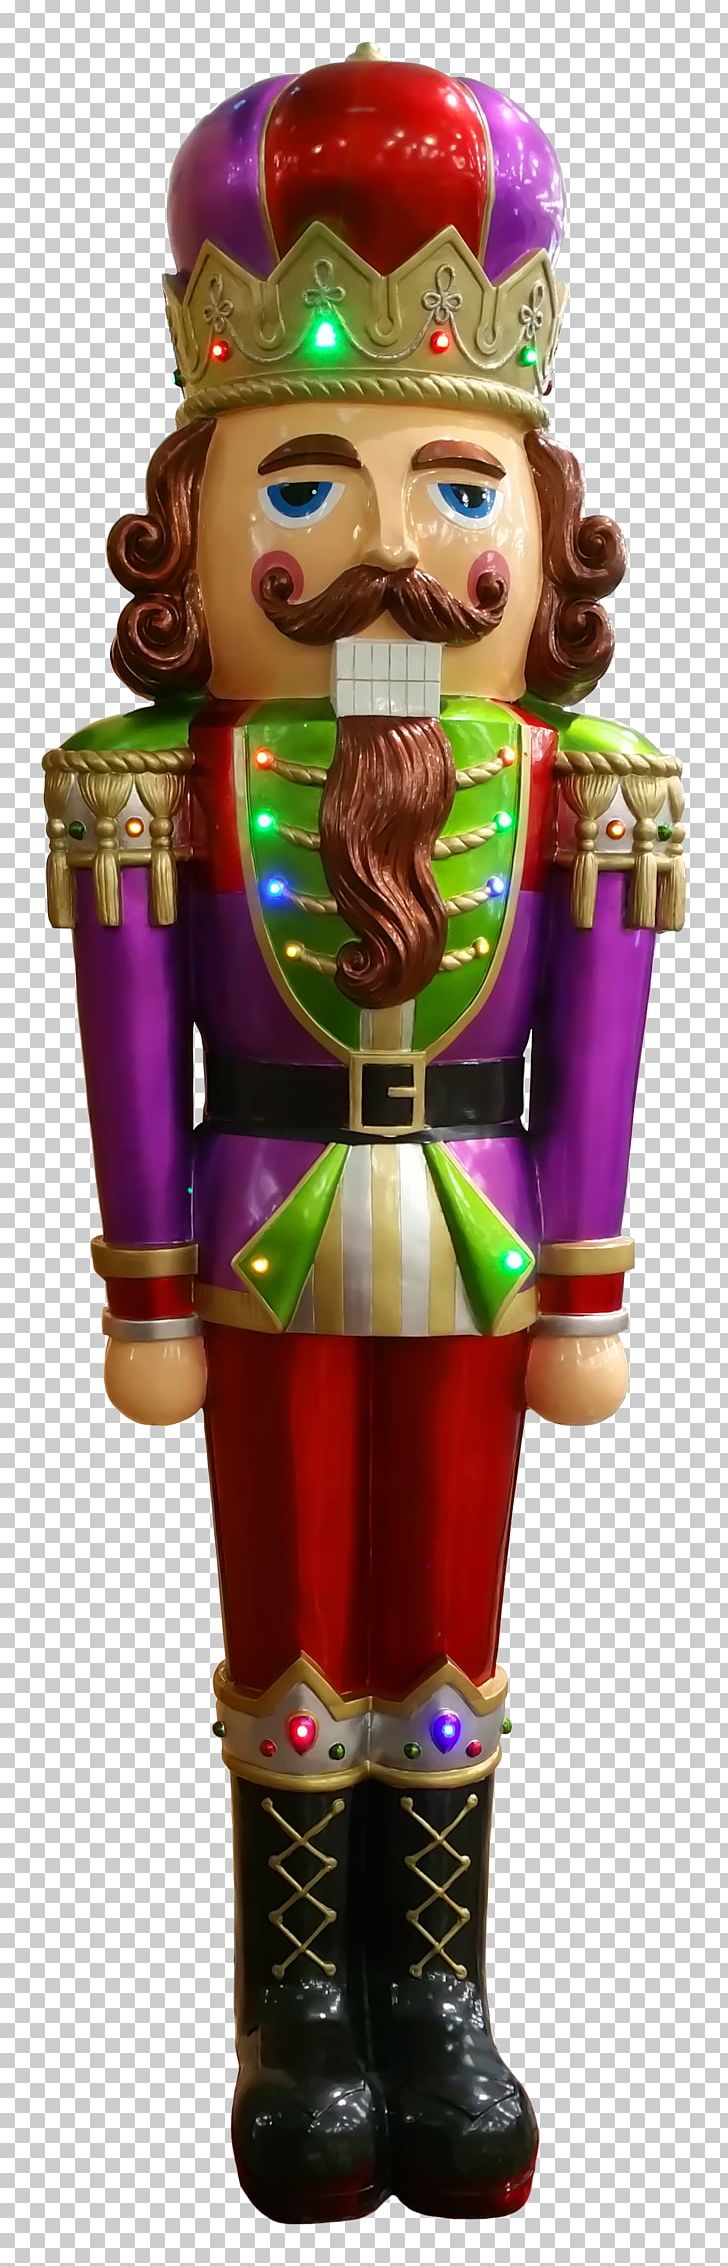 Christmas Nutcracker Doll Toy Soldier PNG, Clipart, Child, Christma, Christmas Decoration, Christmas Jumper, Christmas Ornament Free PNG Download